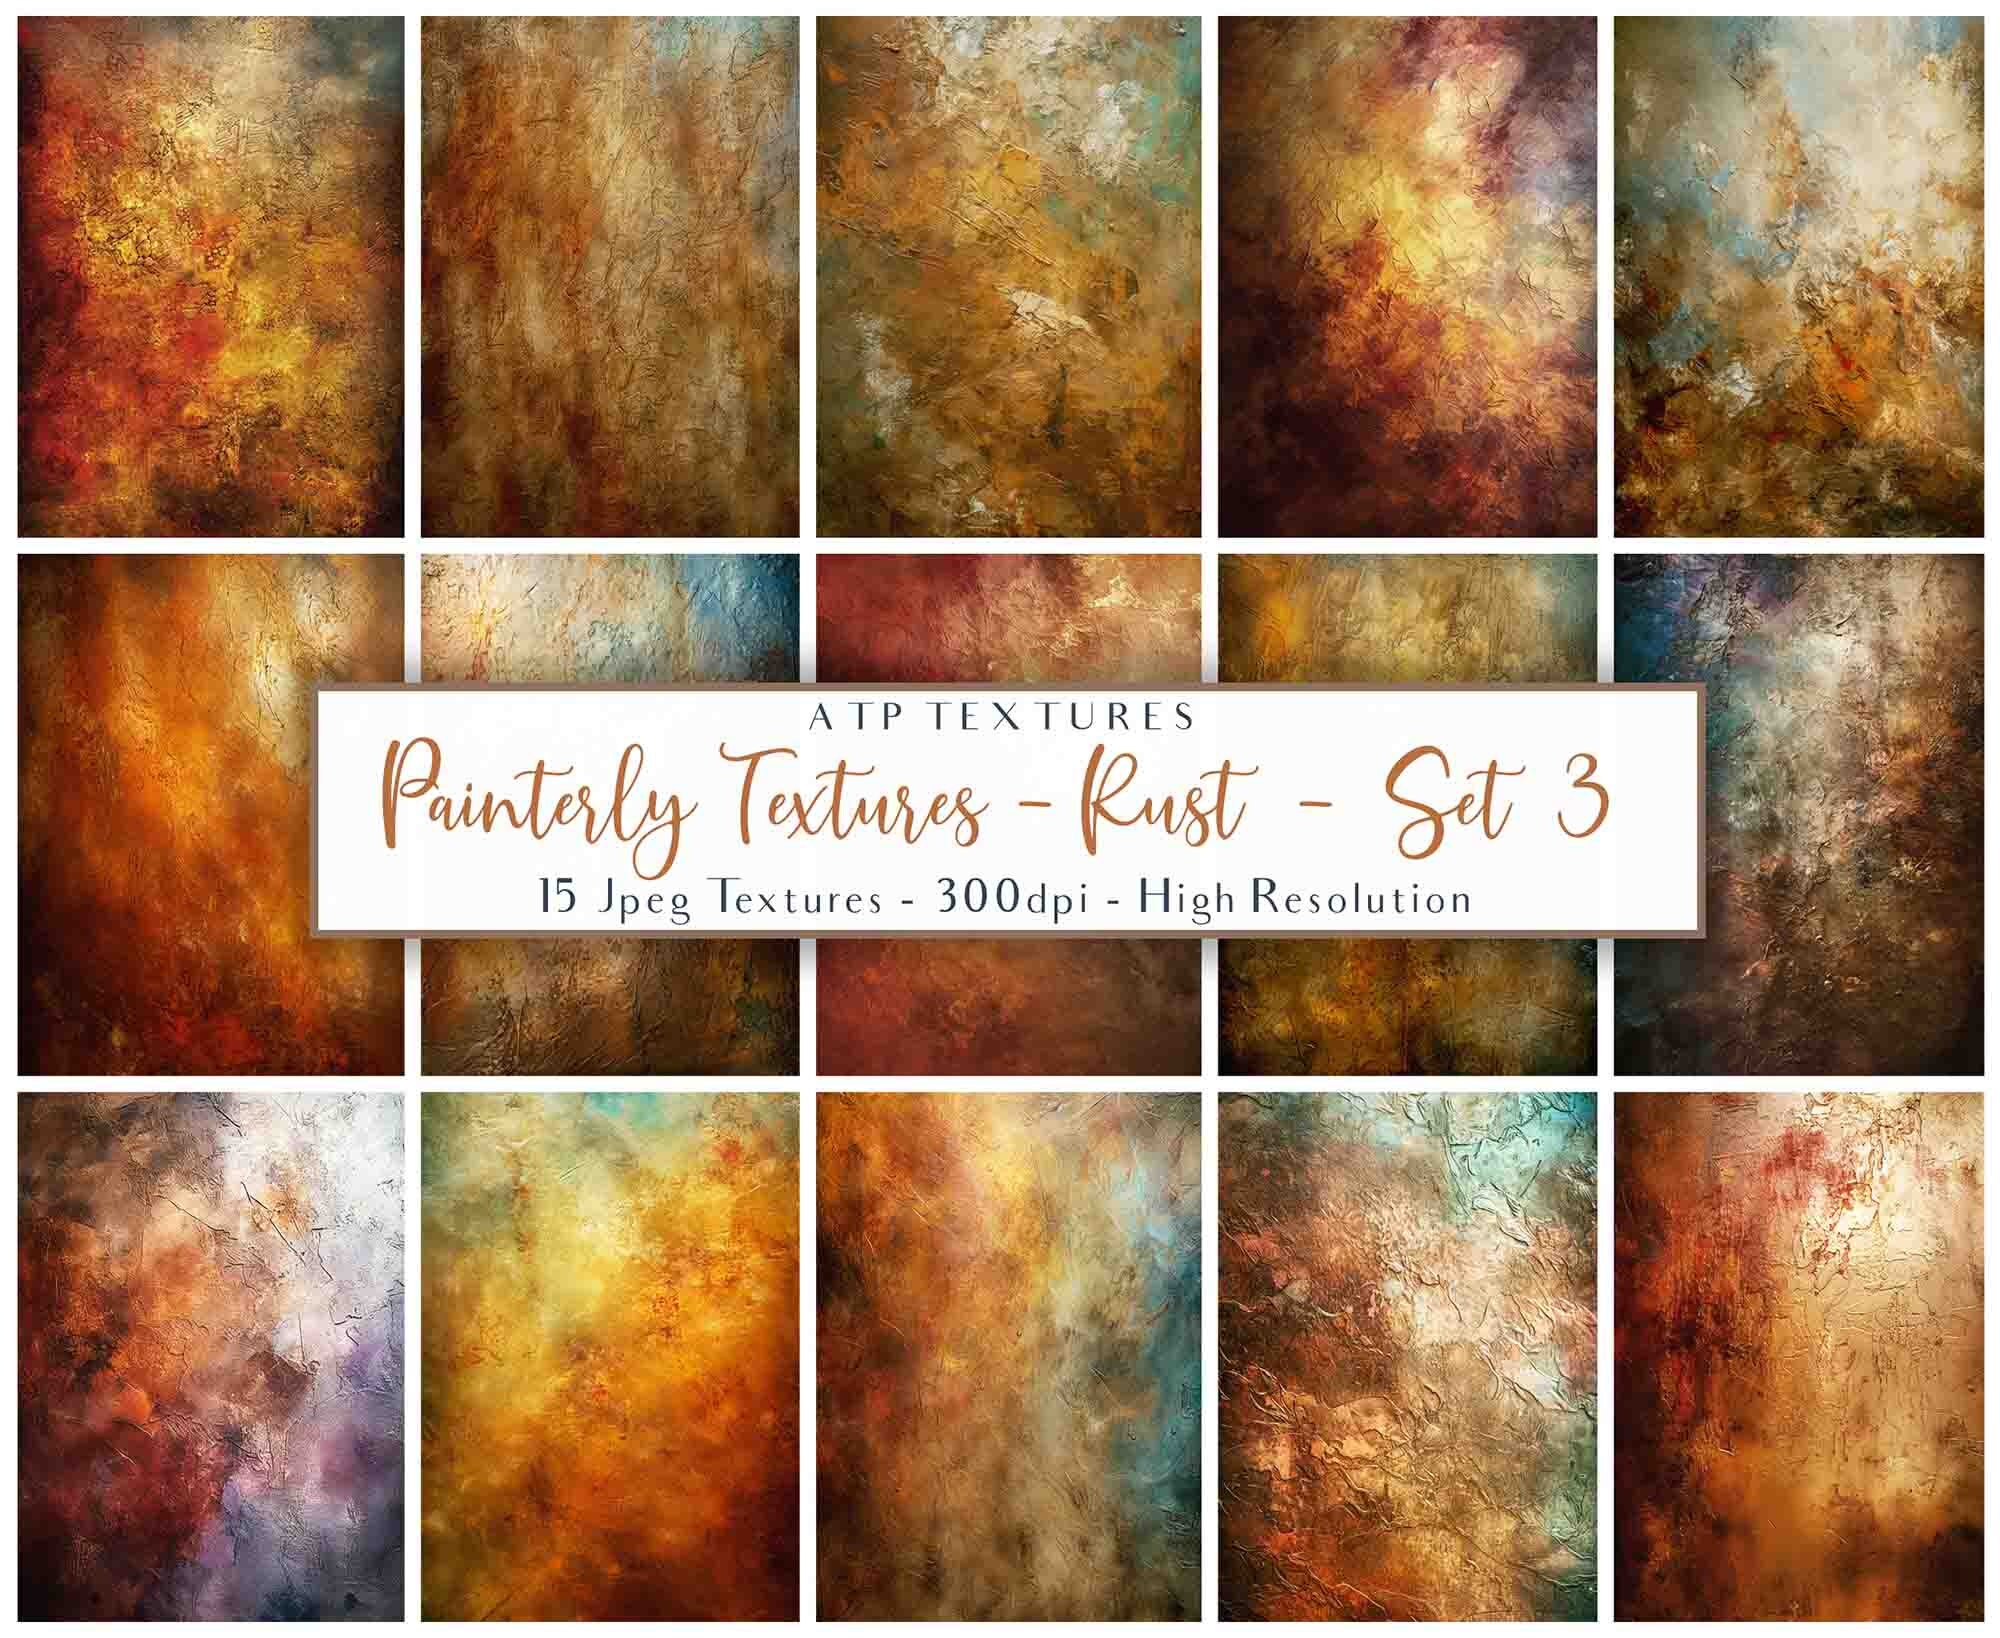 Texture Palette for Dry Brushing Fantasy Elements the Original